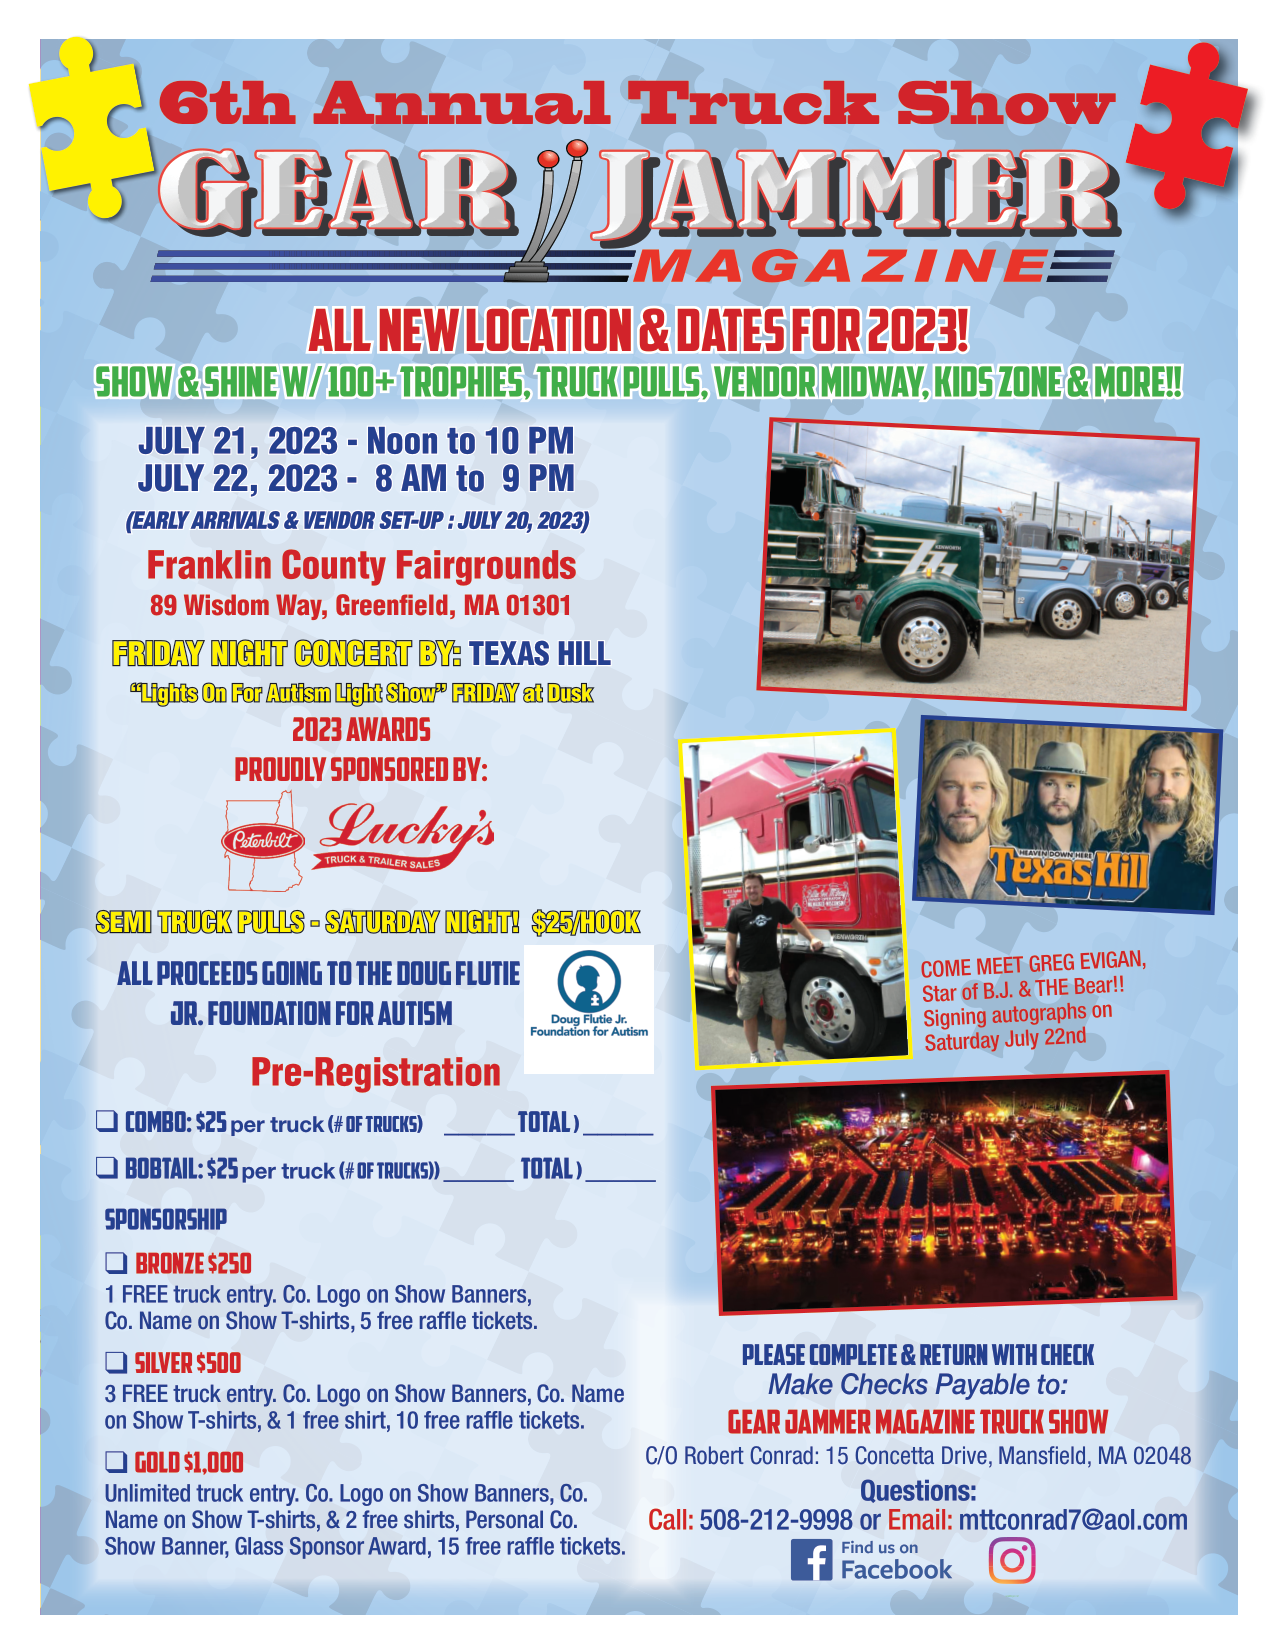 6th ANNUAL GEAR JAMMER MAGAZINE TRUCK SHOW….JULY 21-22 2023